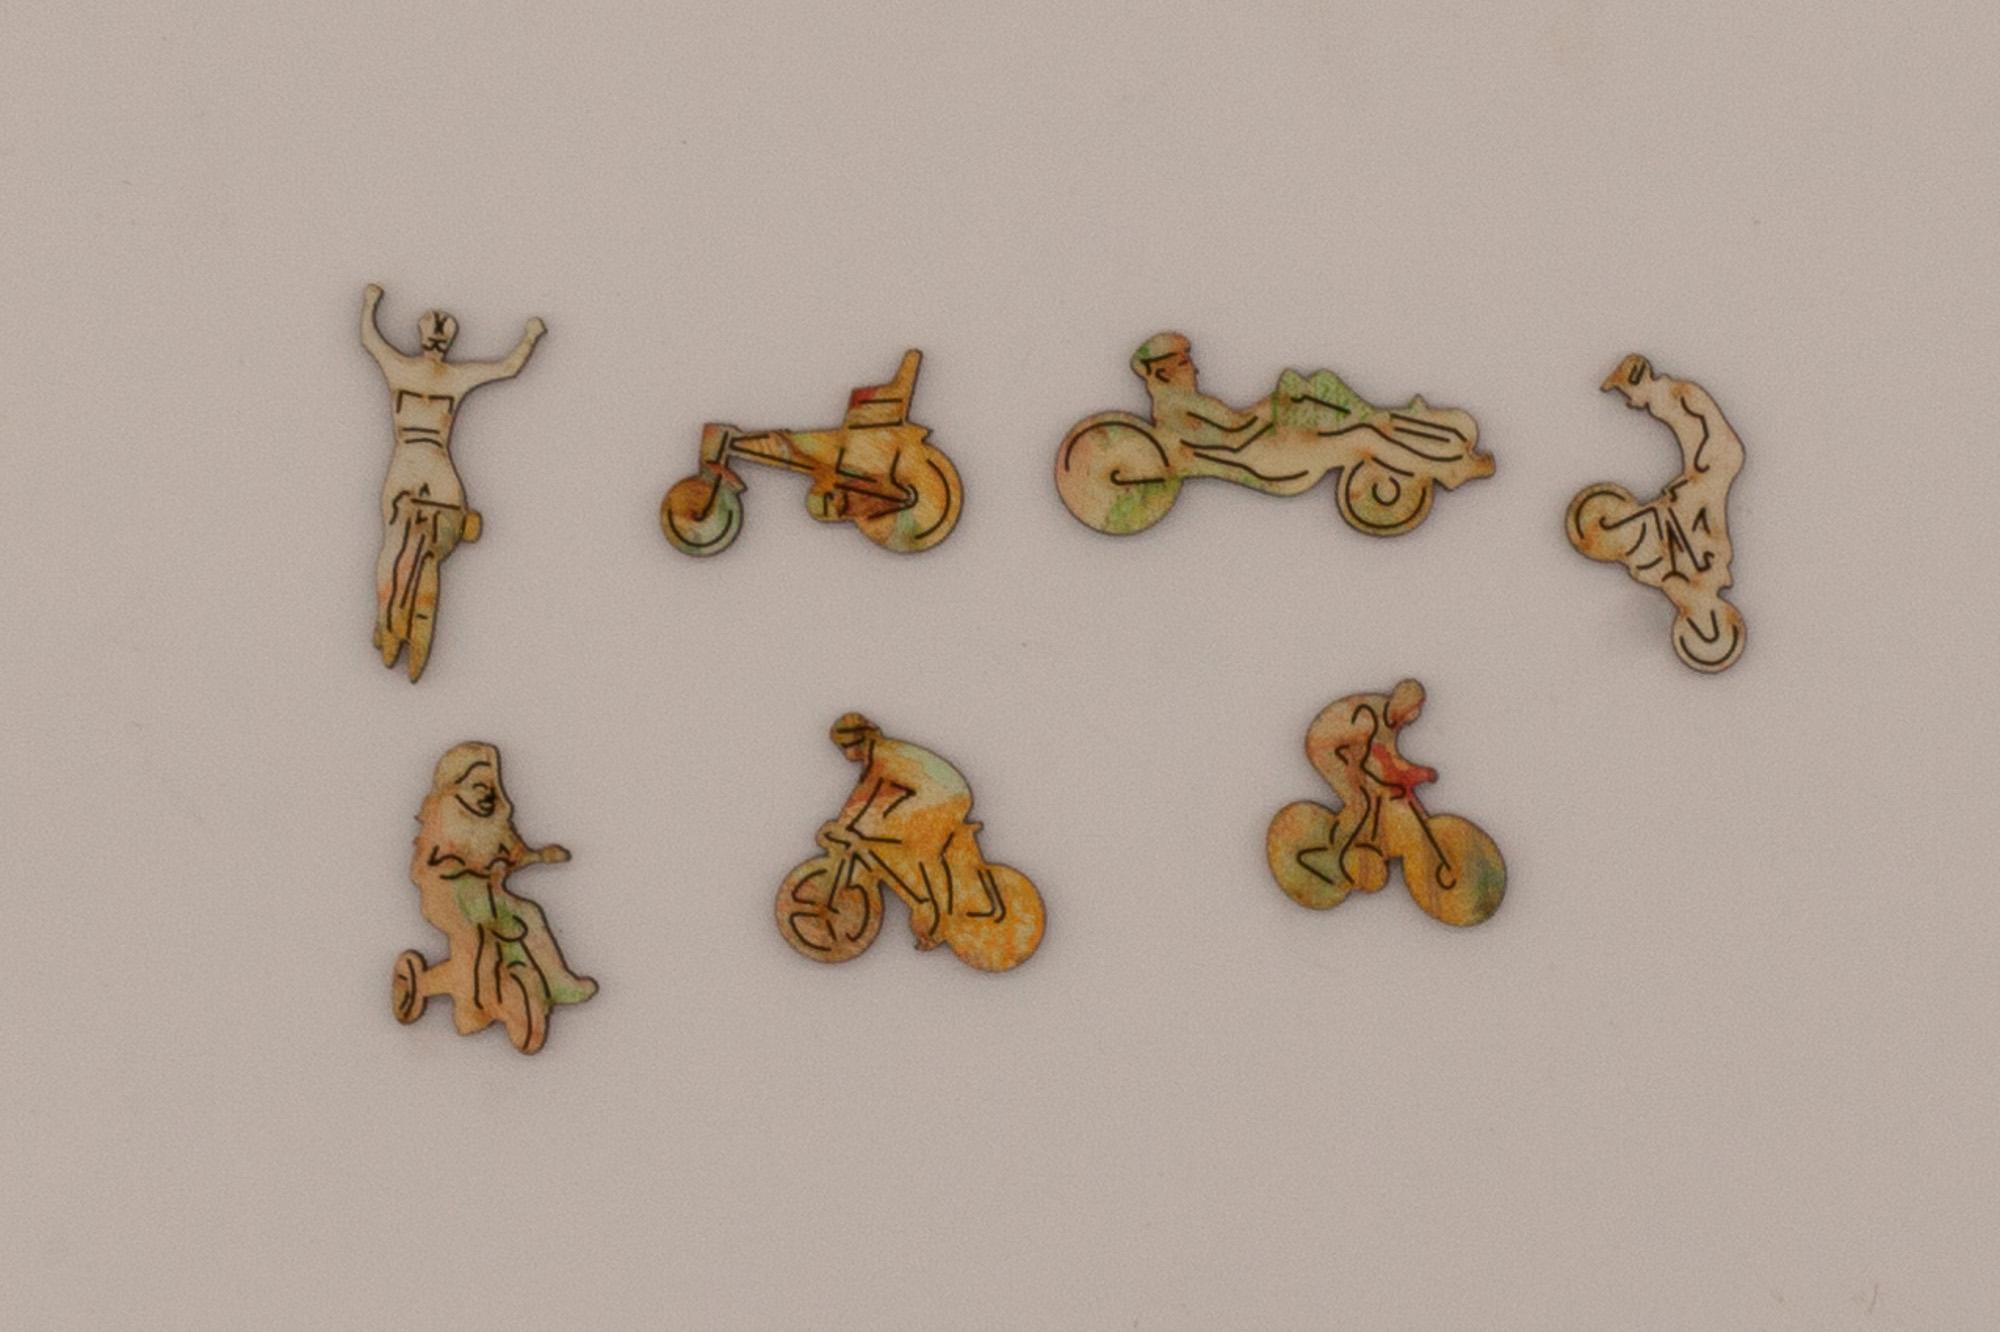 Cyclists Wooden Puzzle